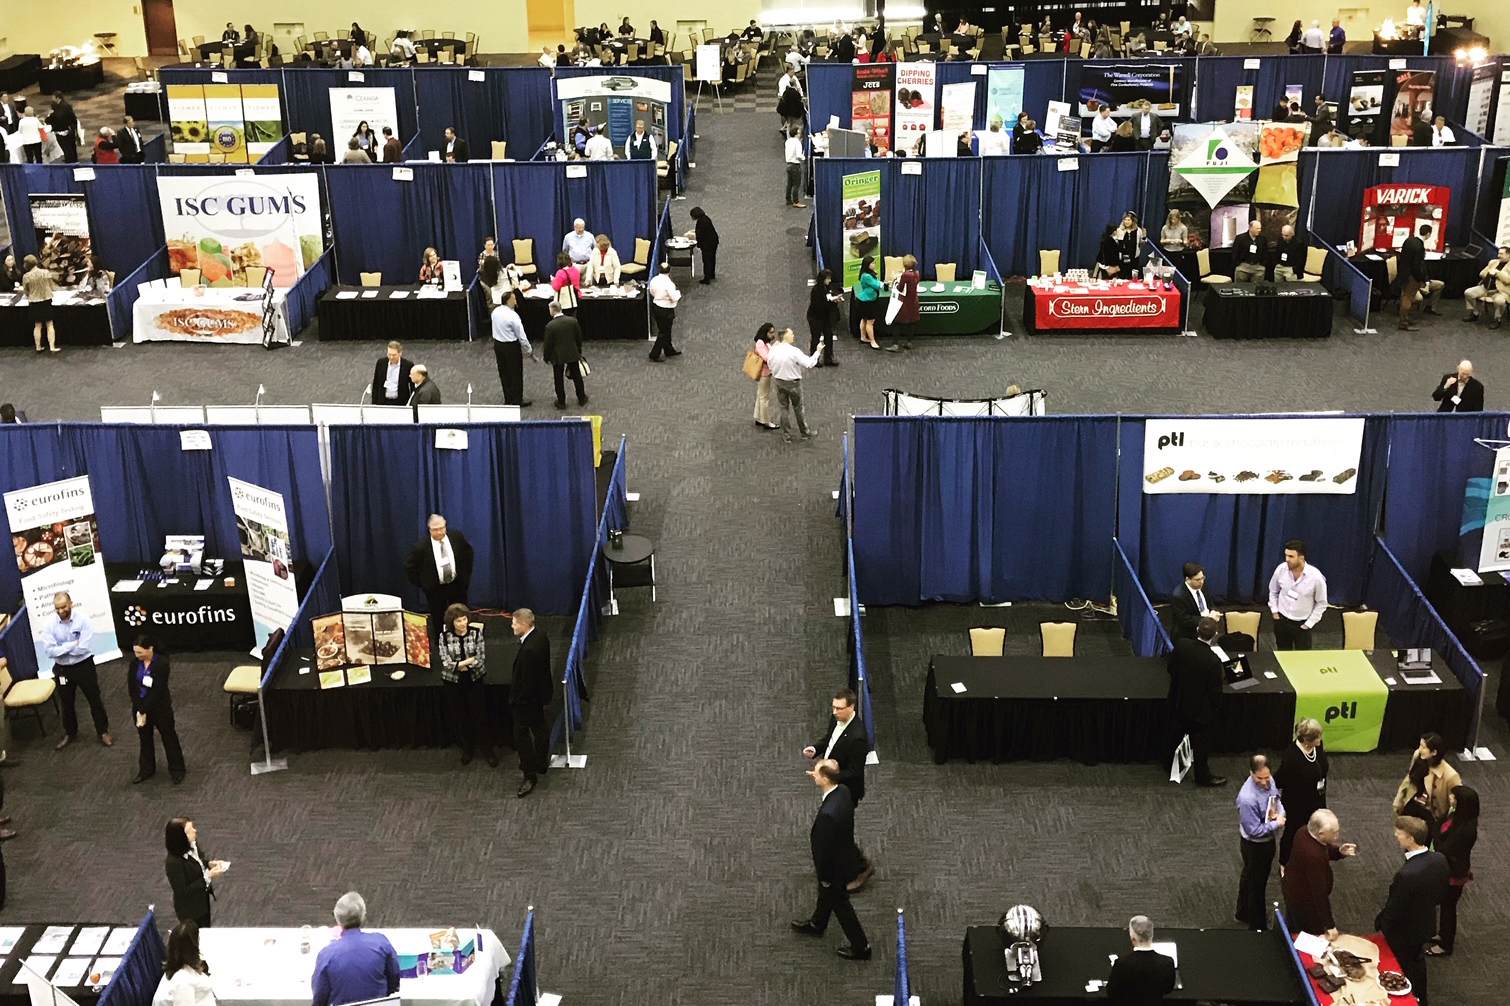 Exhibit hall from above